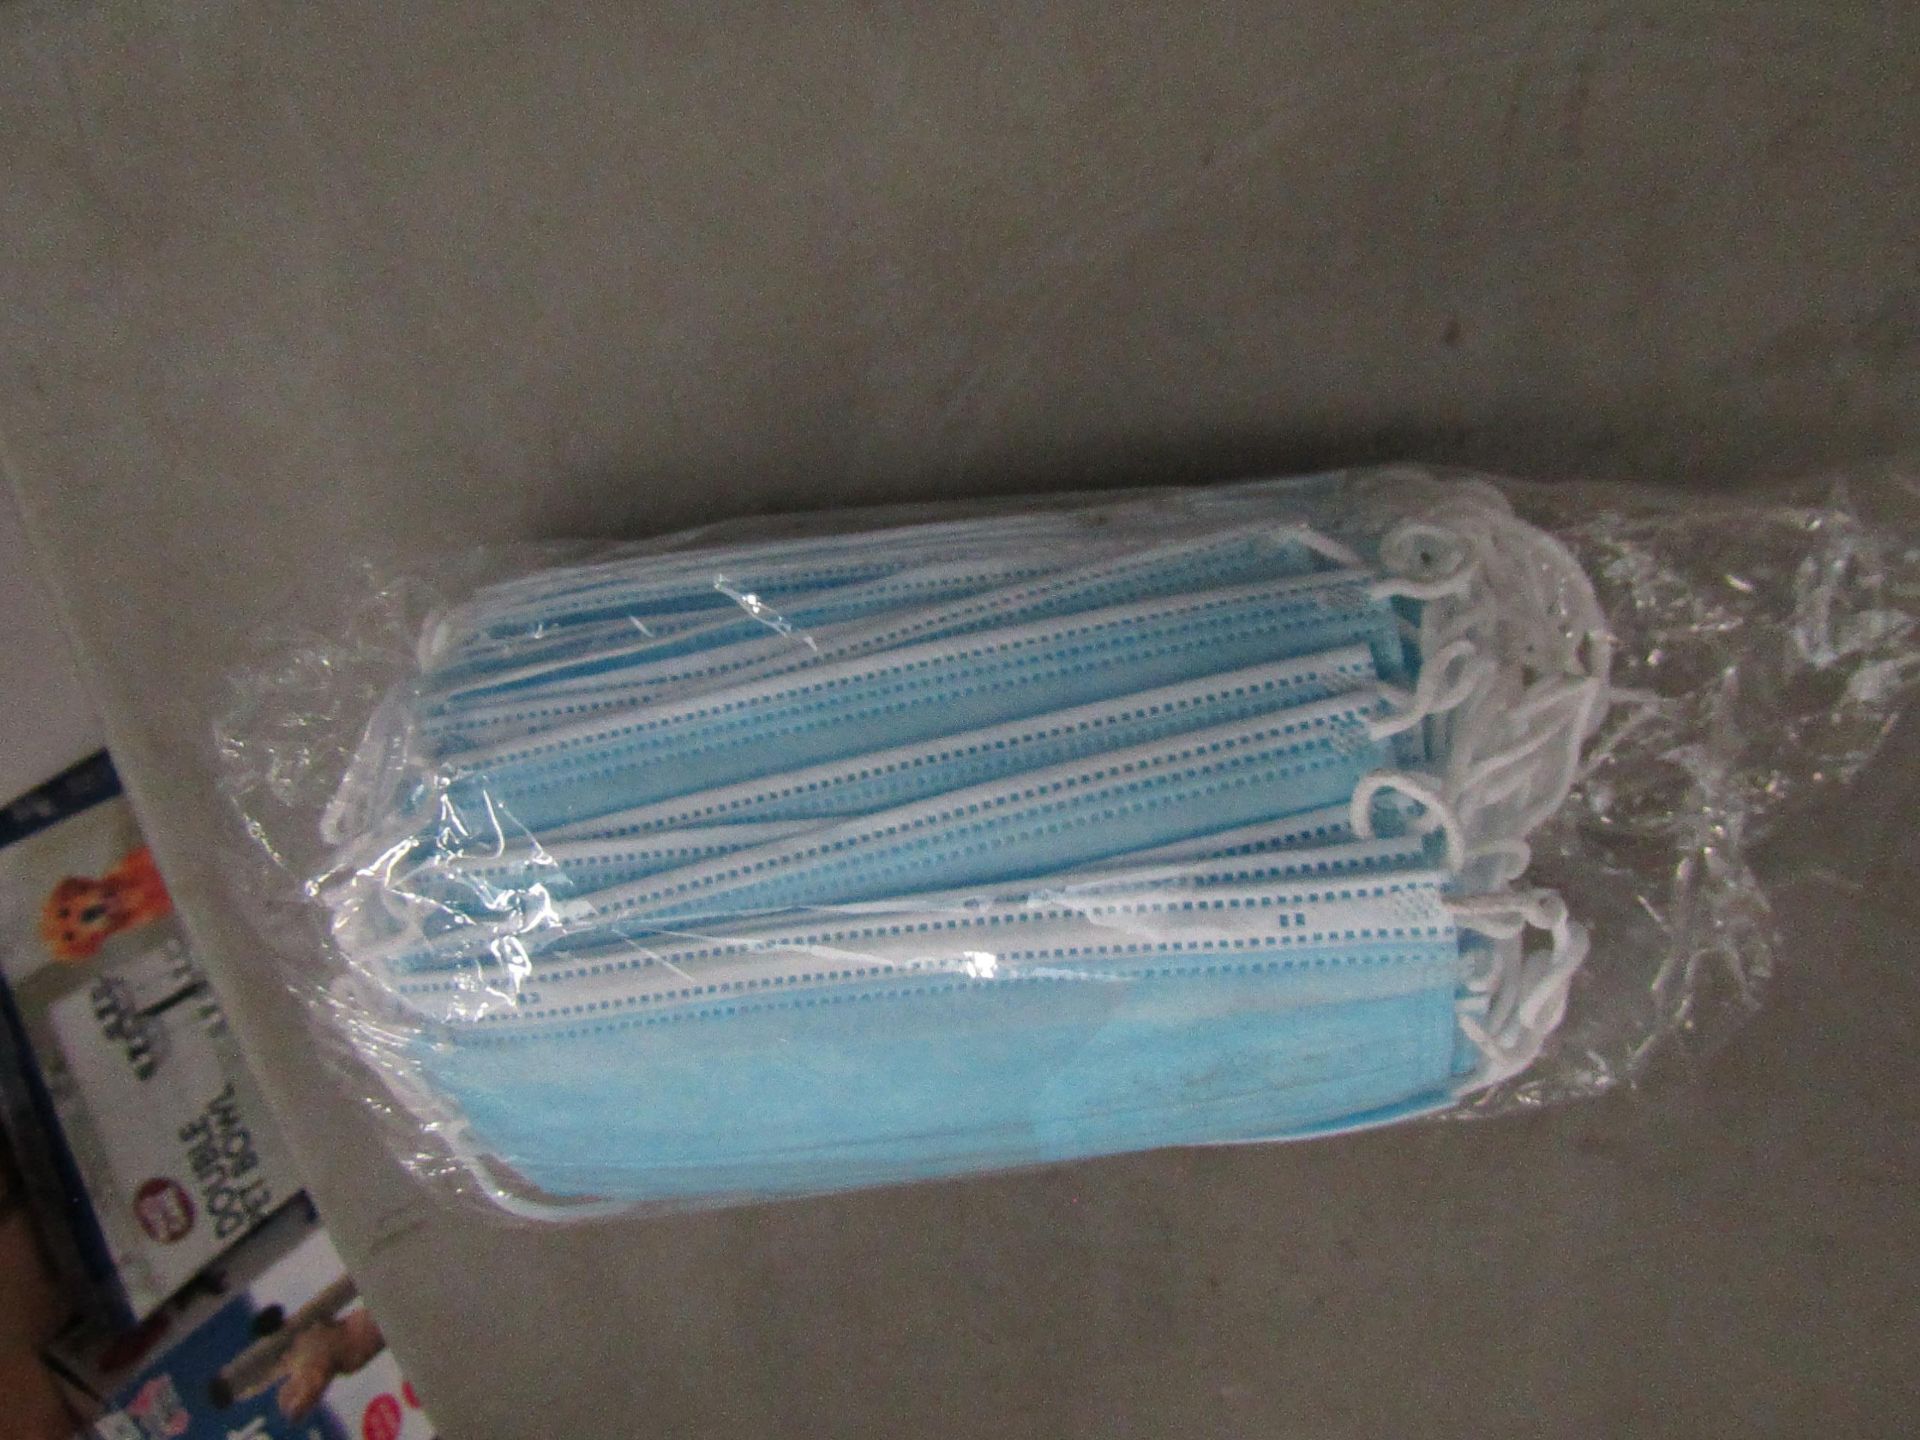 Pack of 50 Disposable Civil Masks. New & packaged